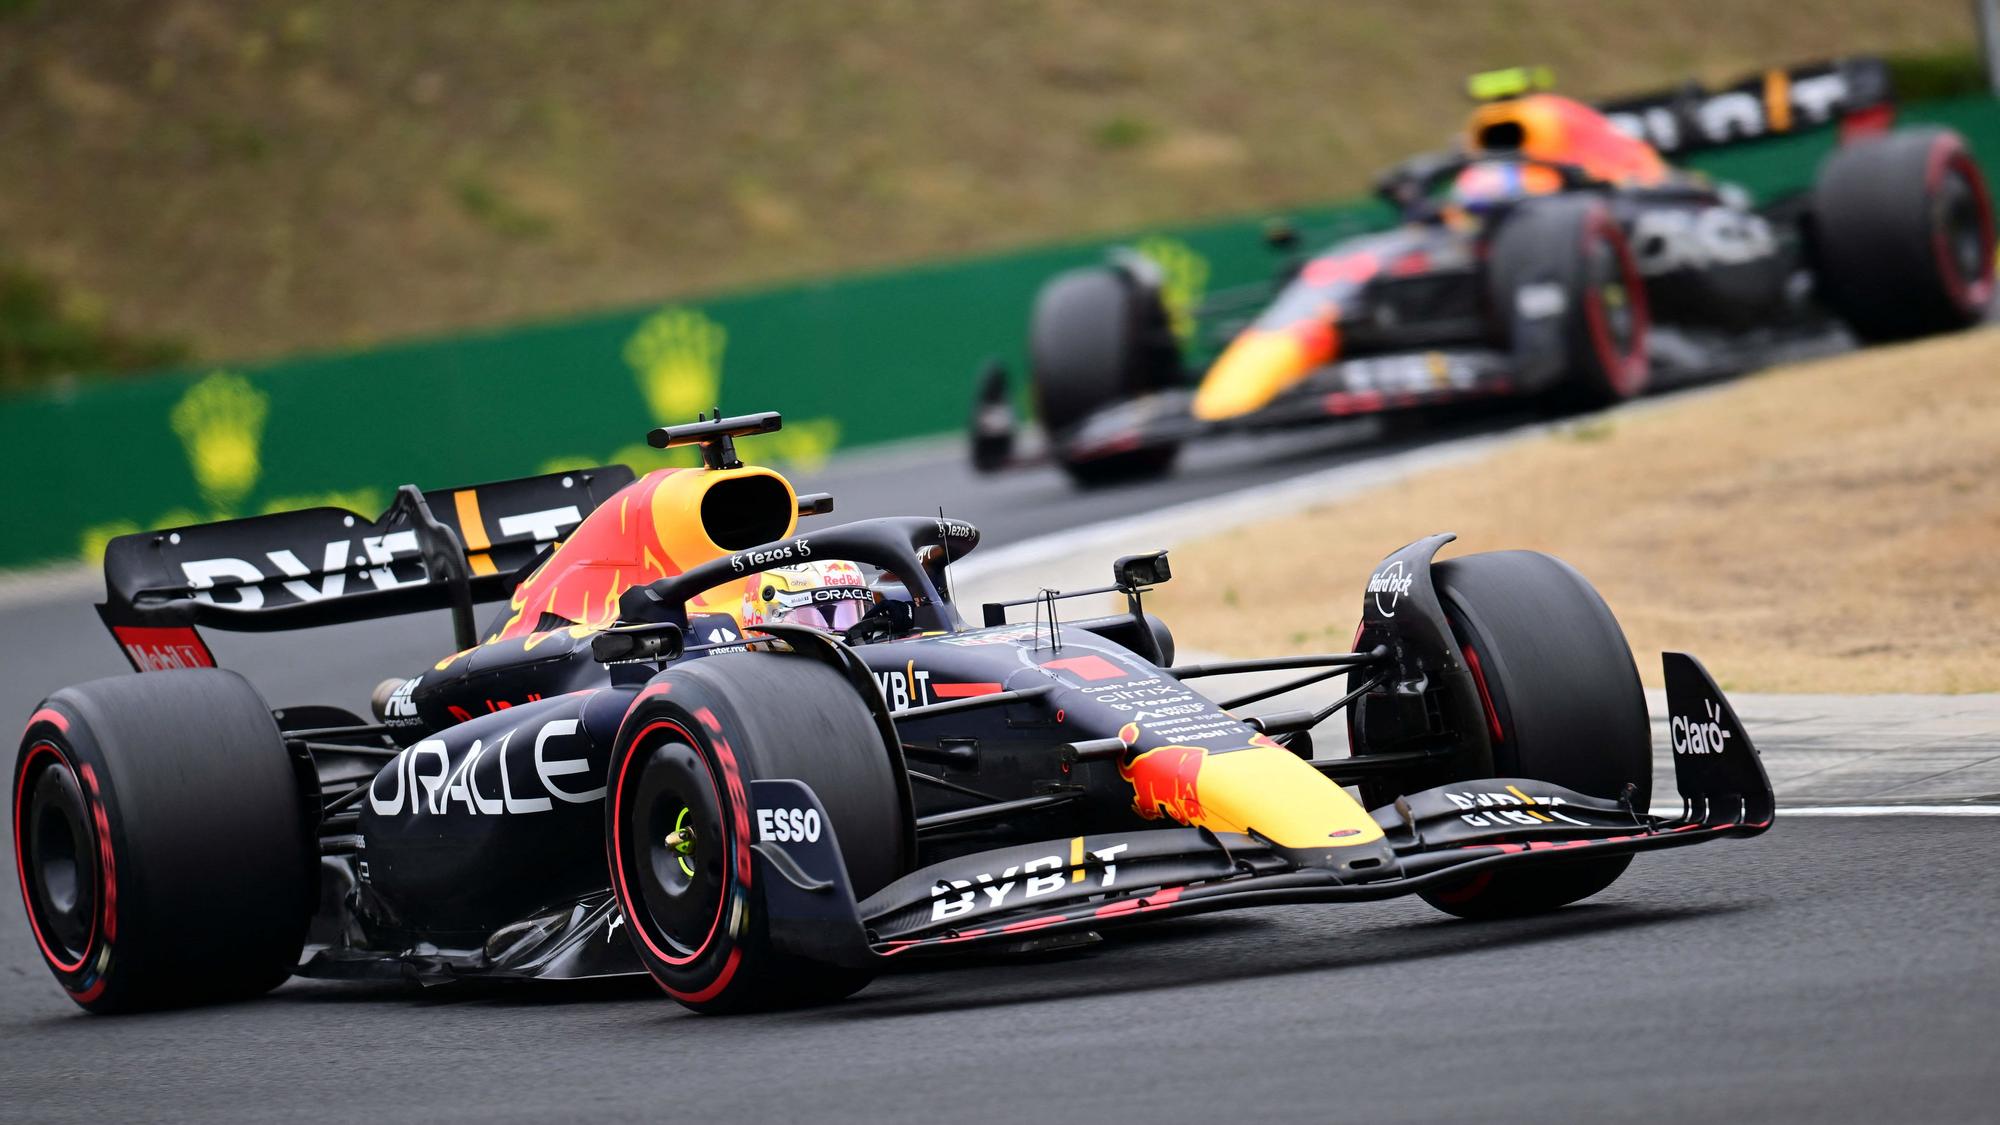 Red Bull Racing's Dutch driver Max Verstappen competes during of the Formula One Hungarian Grand Prix at the Hungaroring in Mogyorod near Budapest, Hungary, on July 31, 2022. (Photo by Jure MAKOVEC / AFP)